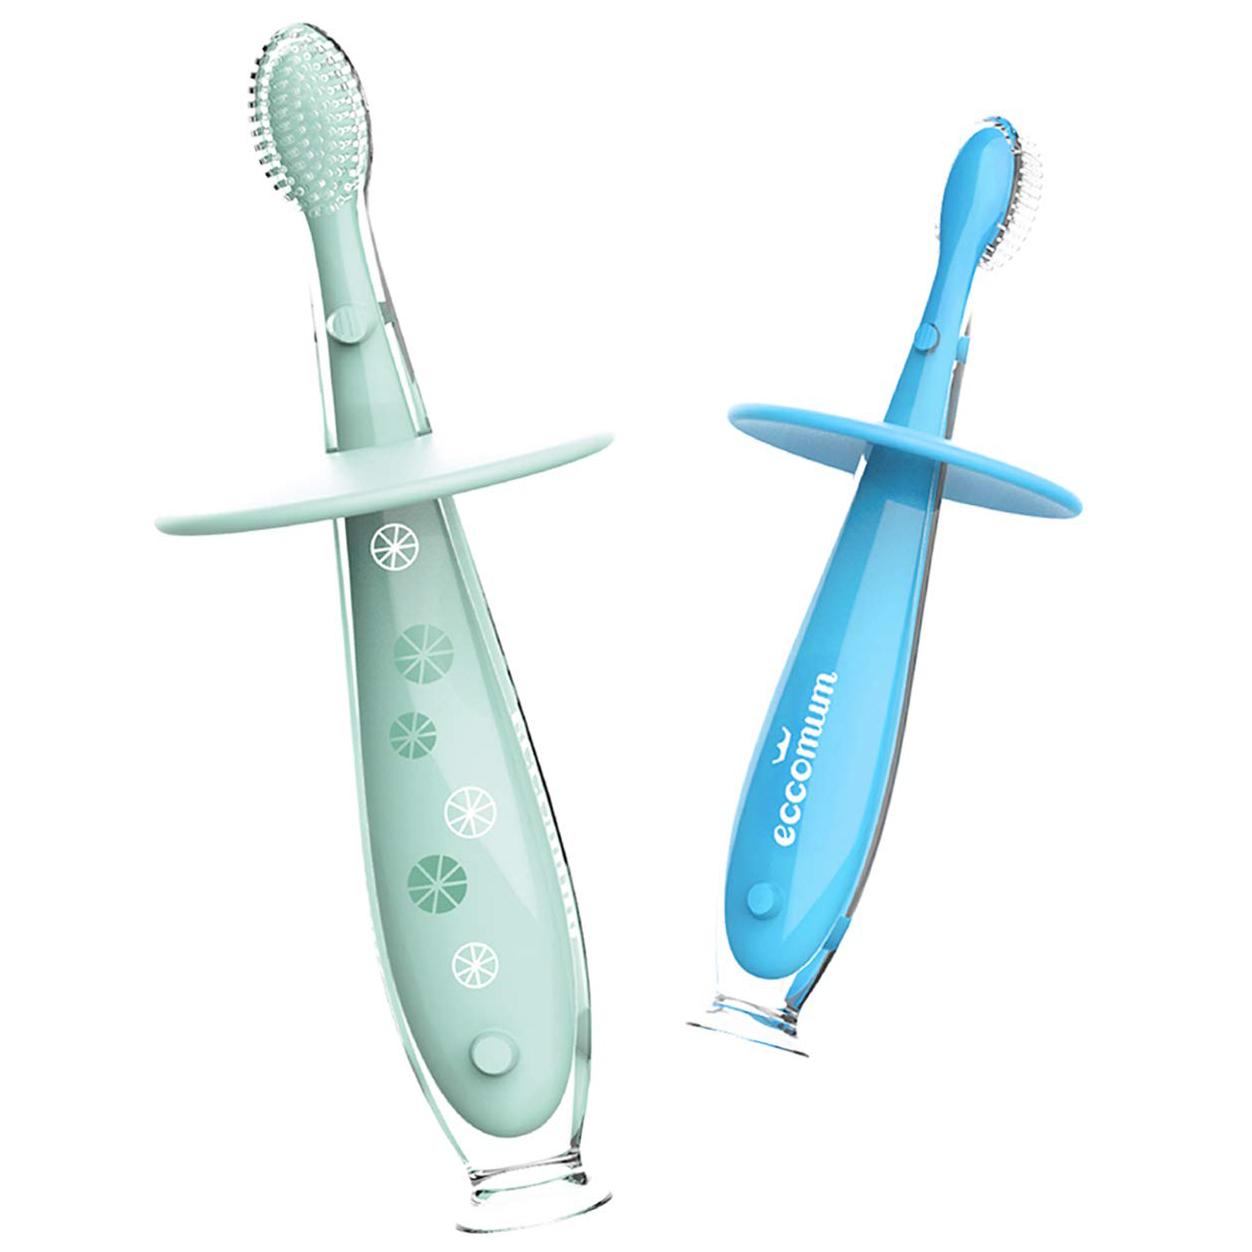 2 Baby Toothbrush Silicone Infant Training Toothbrush for $6.29